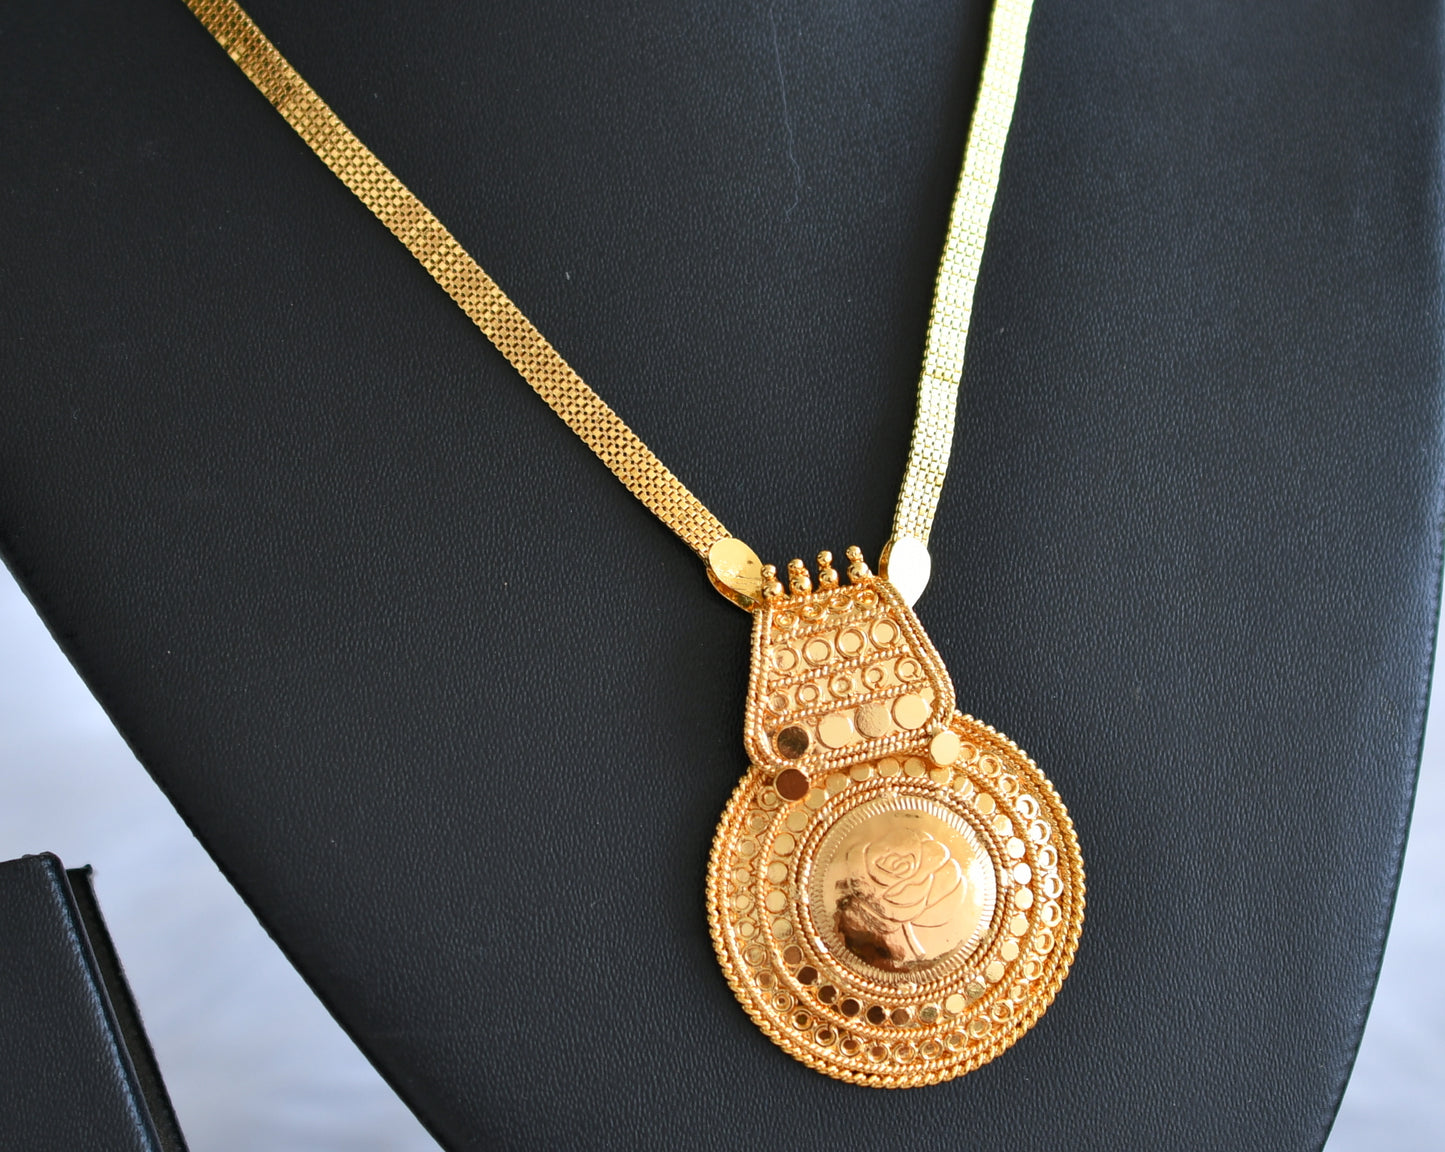 Gold tone round rose pendant with chain dj-39989